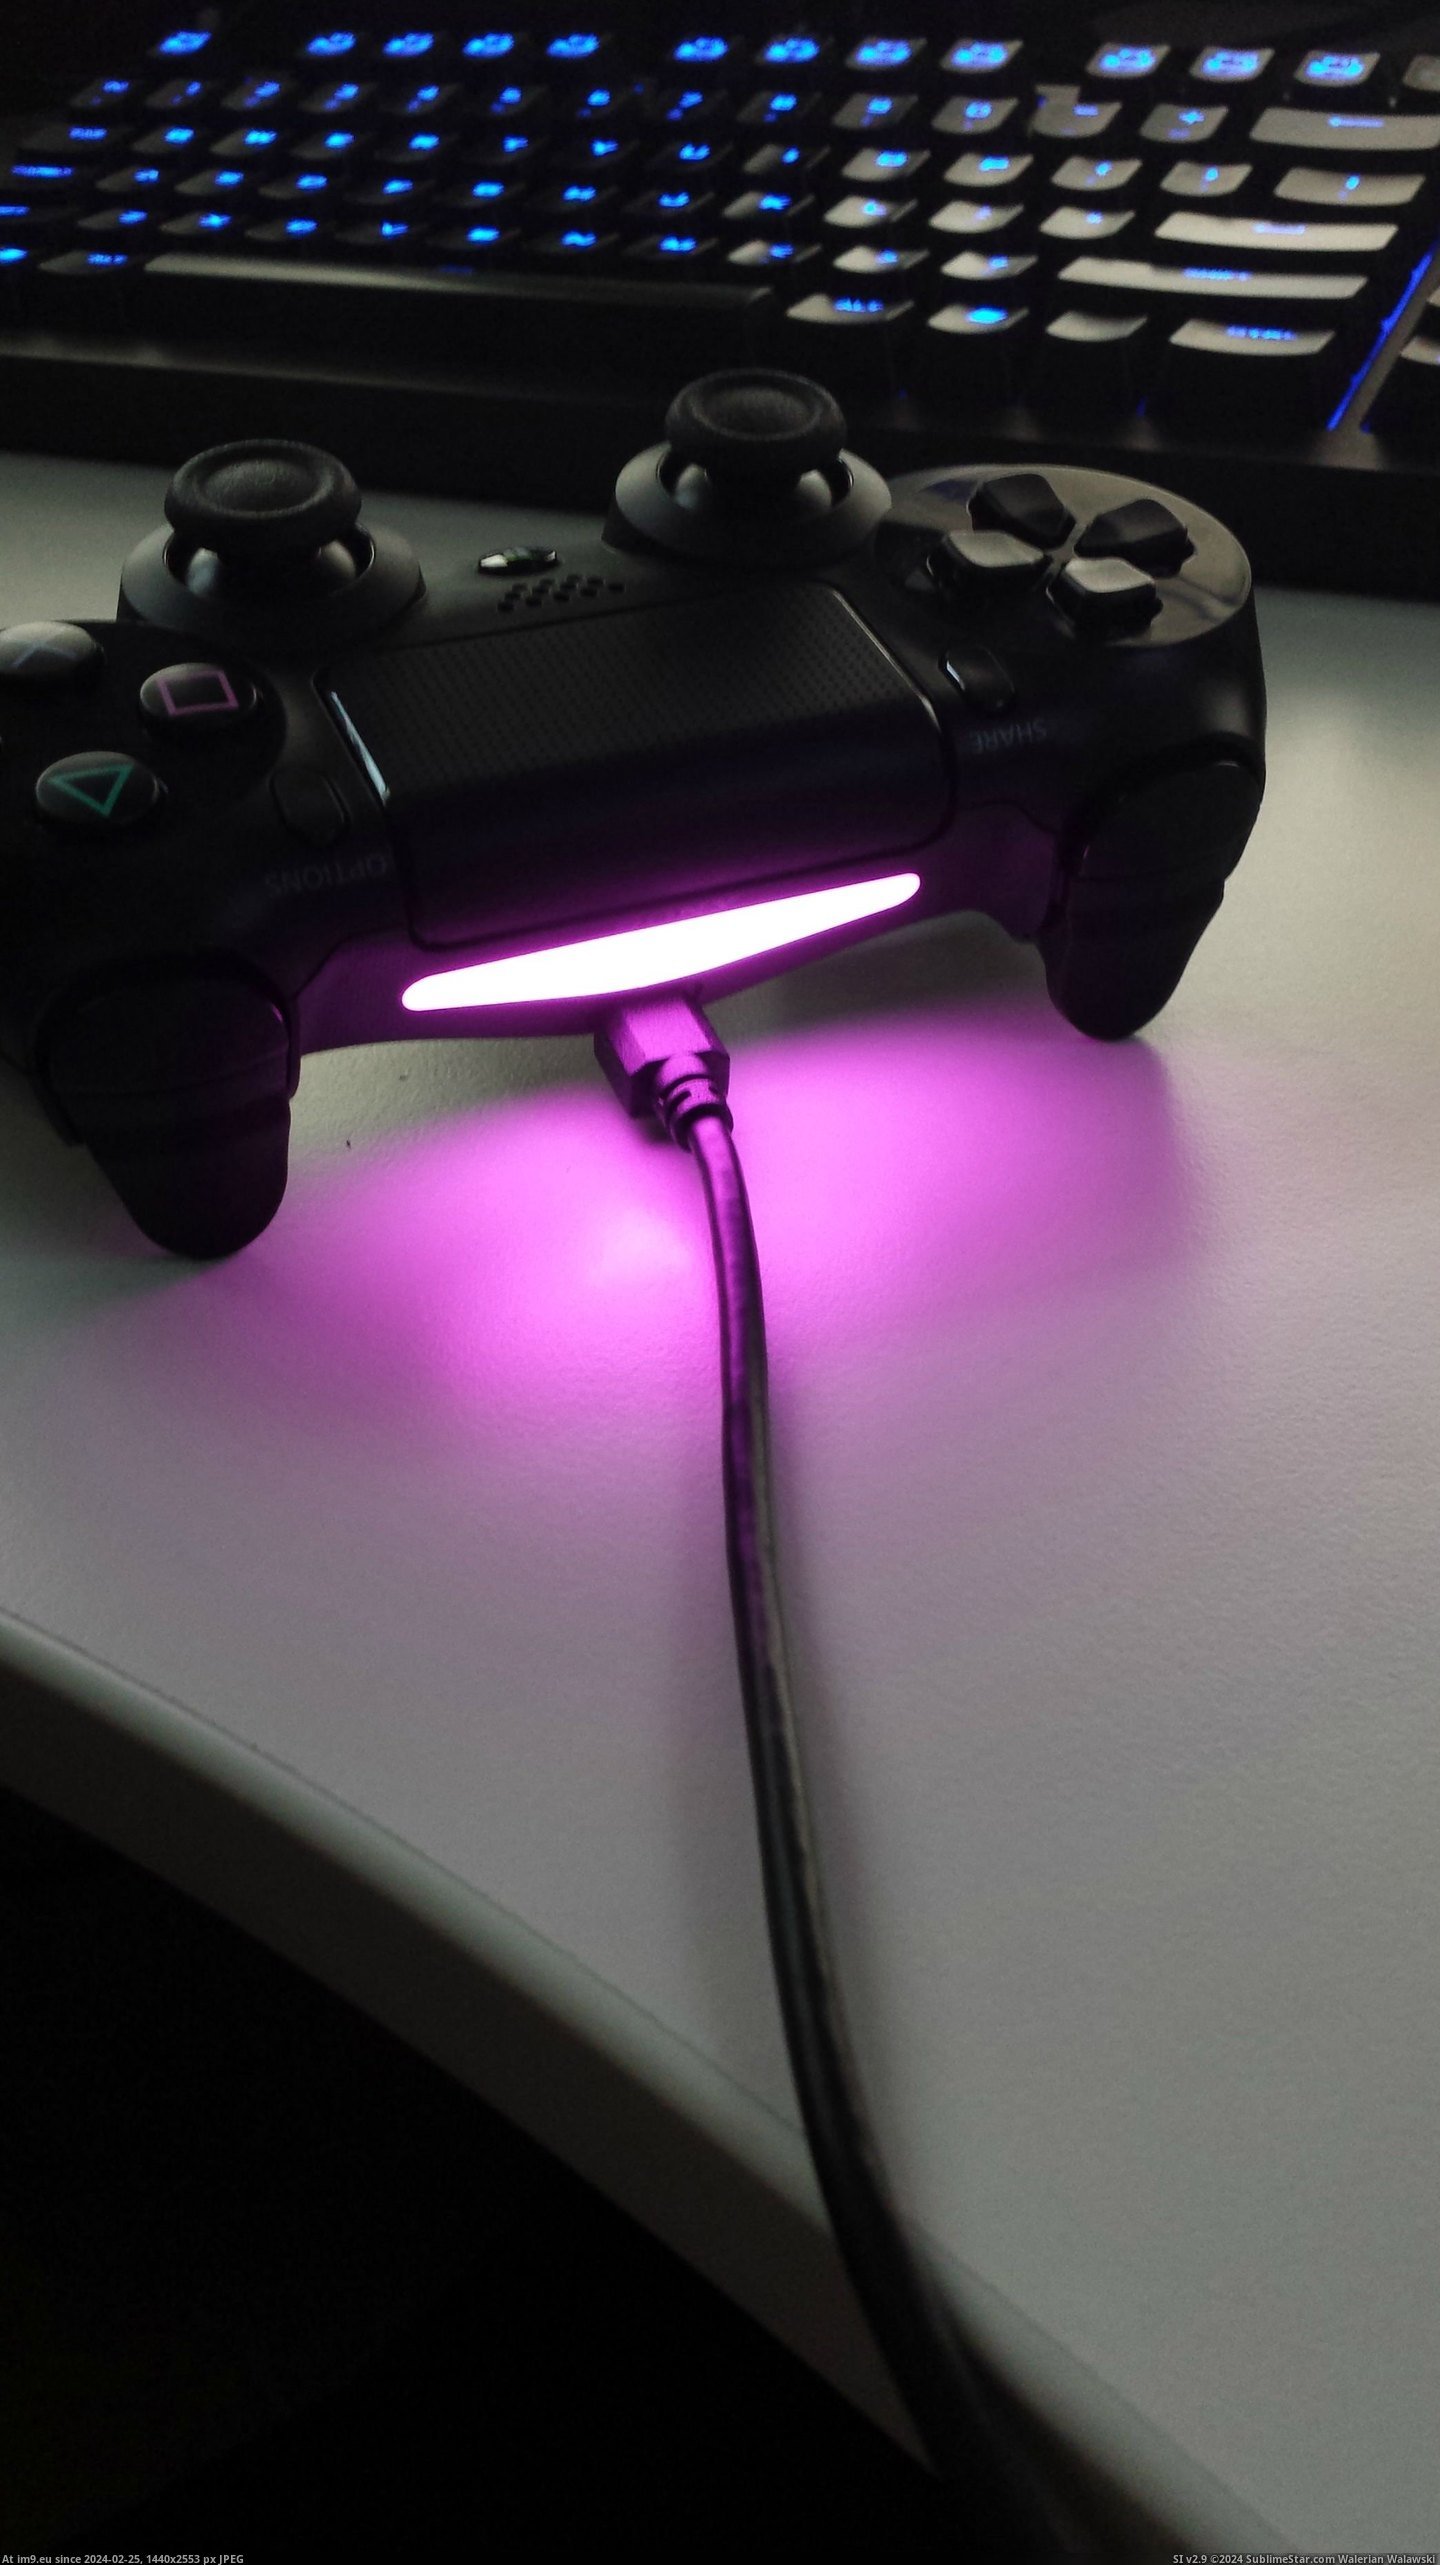 #Gaming #Change #Ps4 #Lightbar #Color #Controller [Gaming] If you use the PS4 controller on the PC, you can change the color of the lightbar. 1 Pic. (Obraz z album My r/GAMING favs))